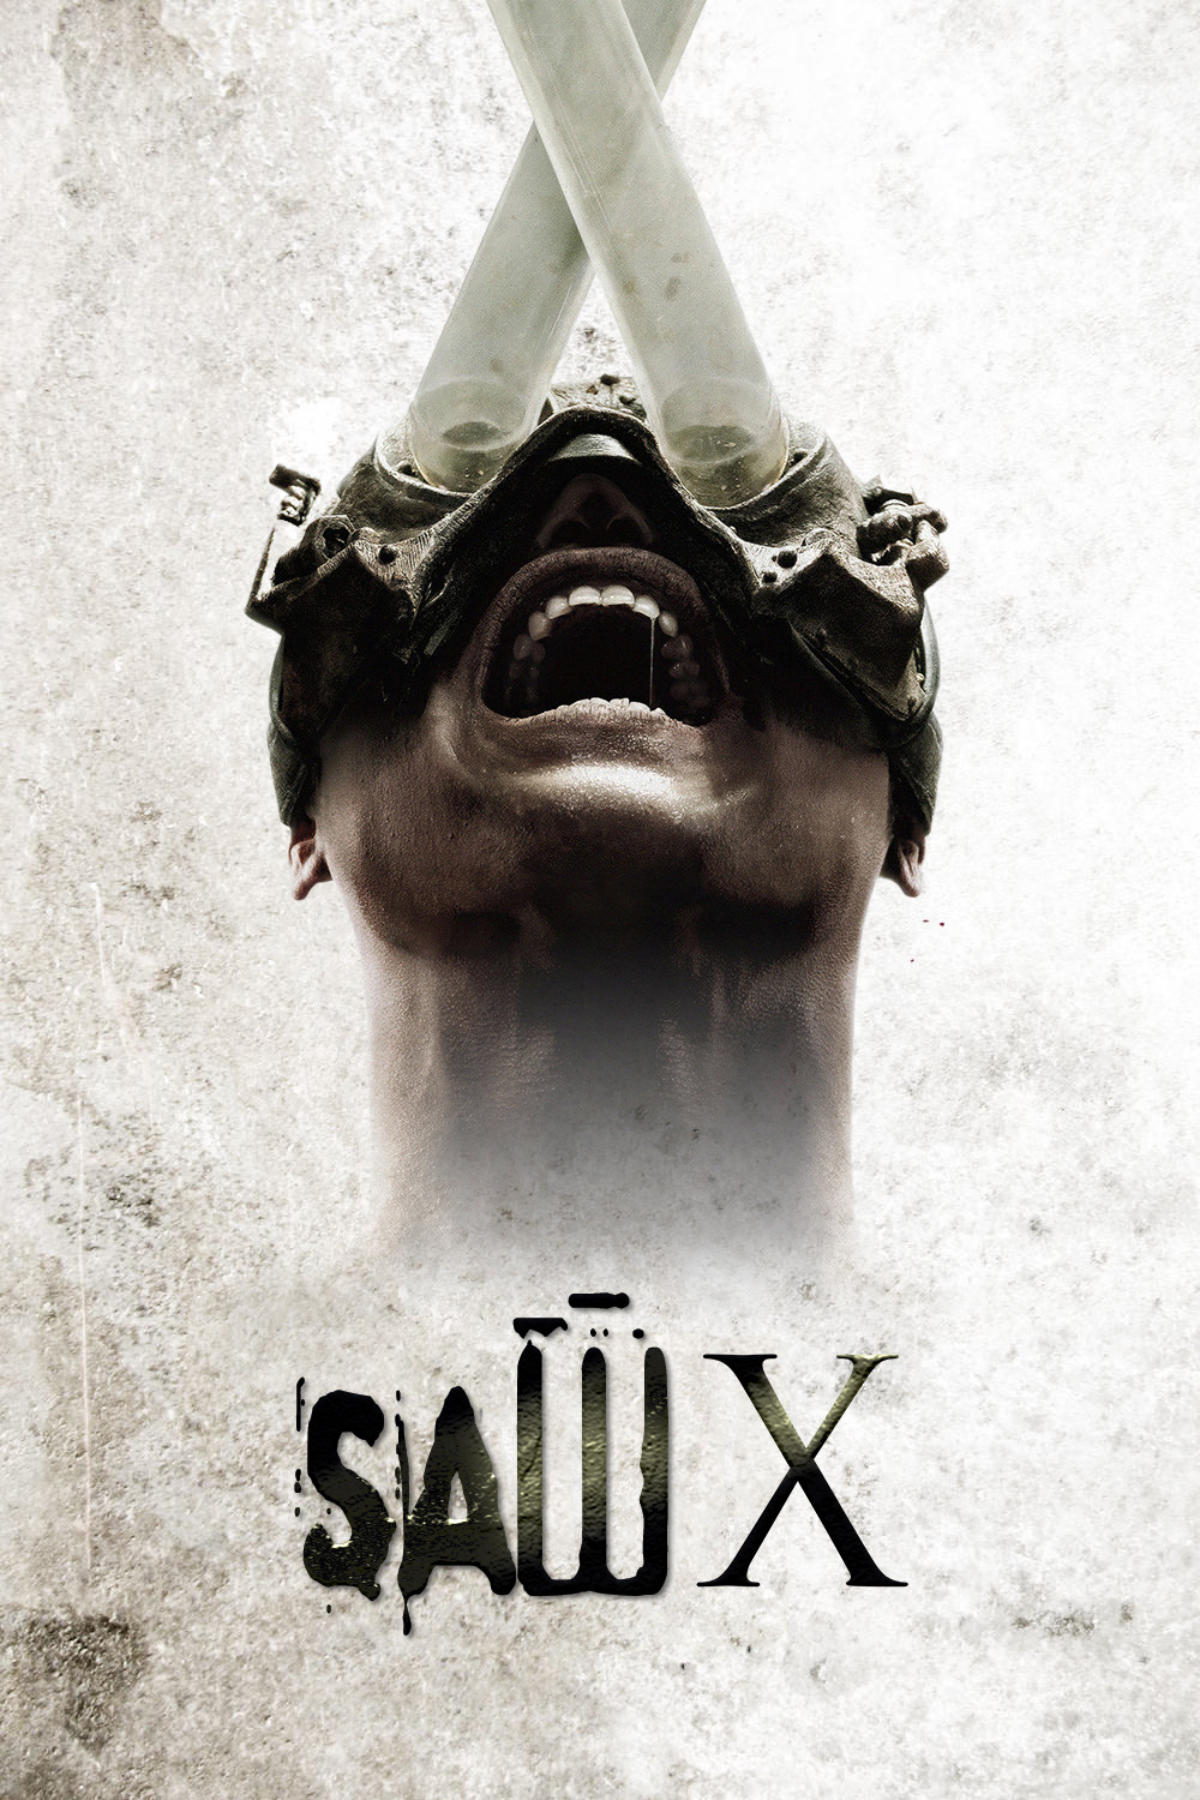 saw x review